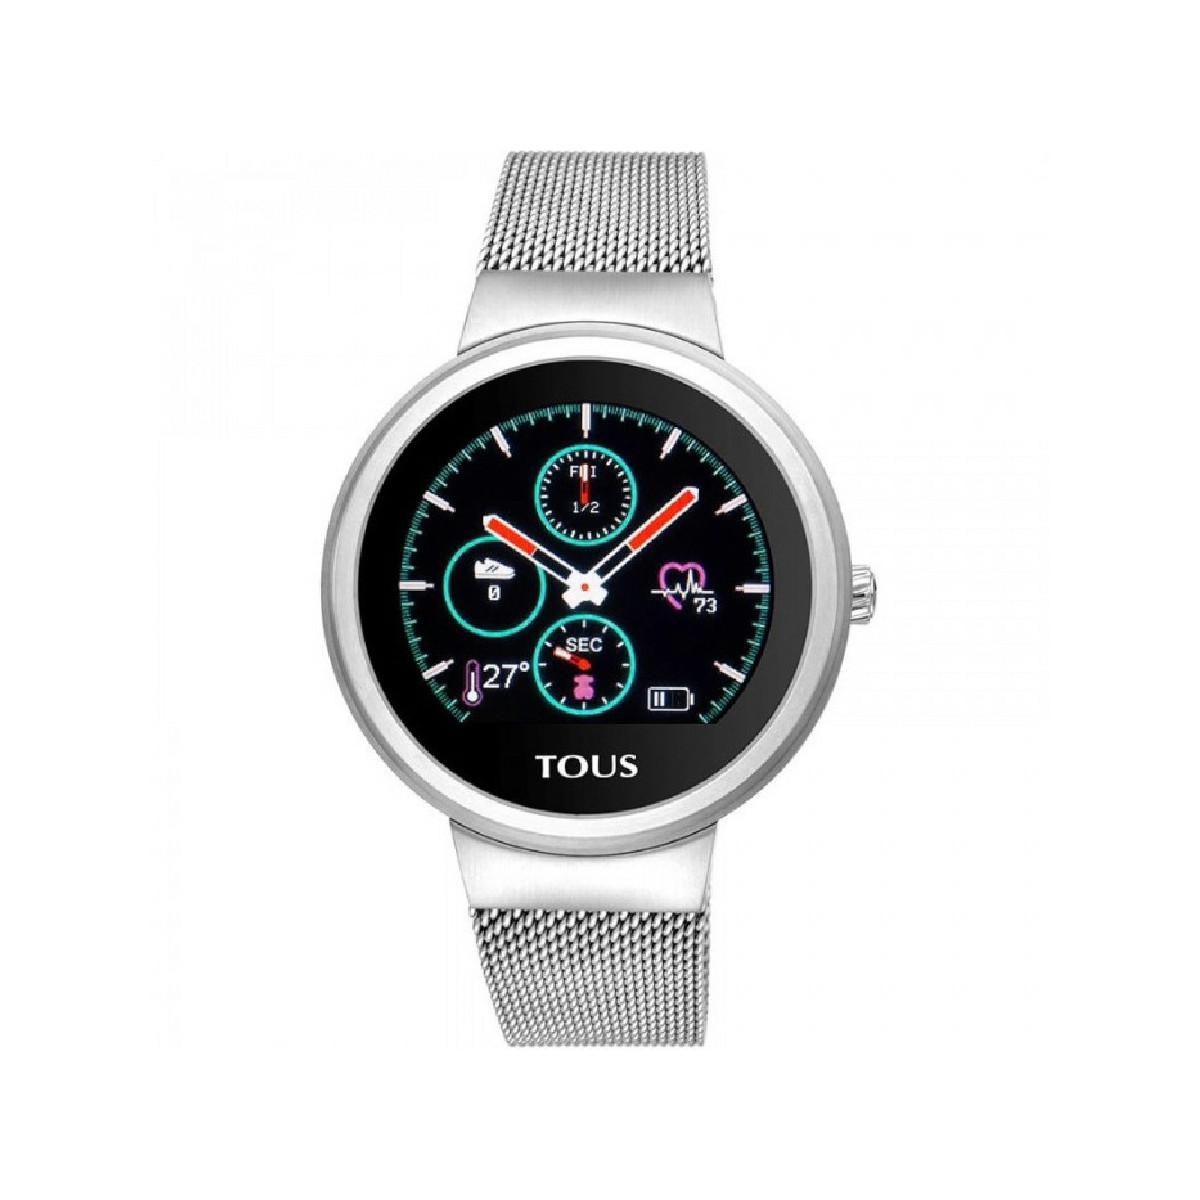 RELOJ TOUS ACTIVITY ROND TOUCH - 000351640